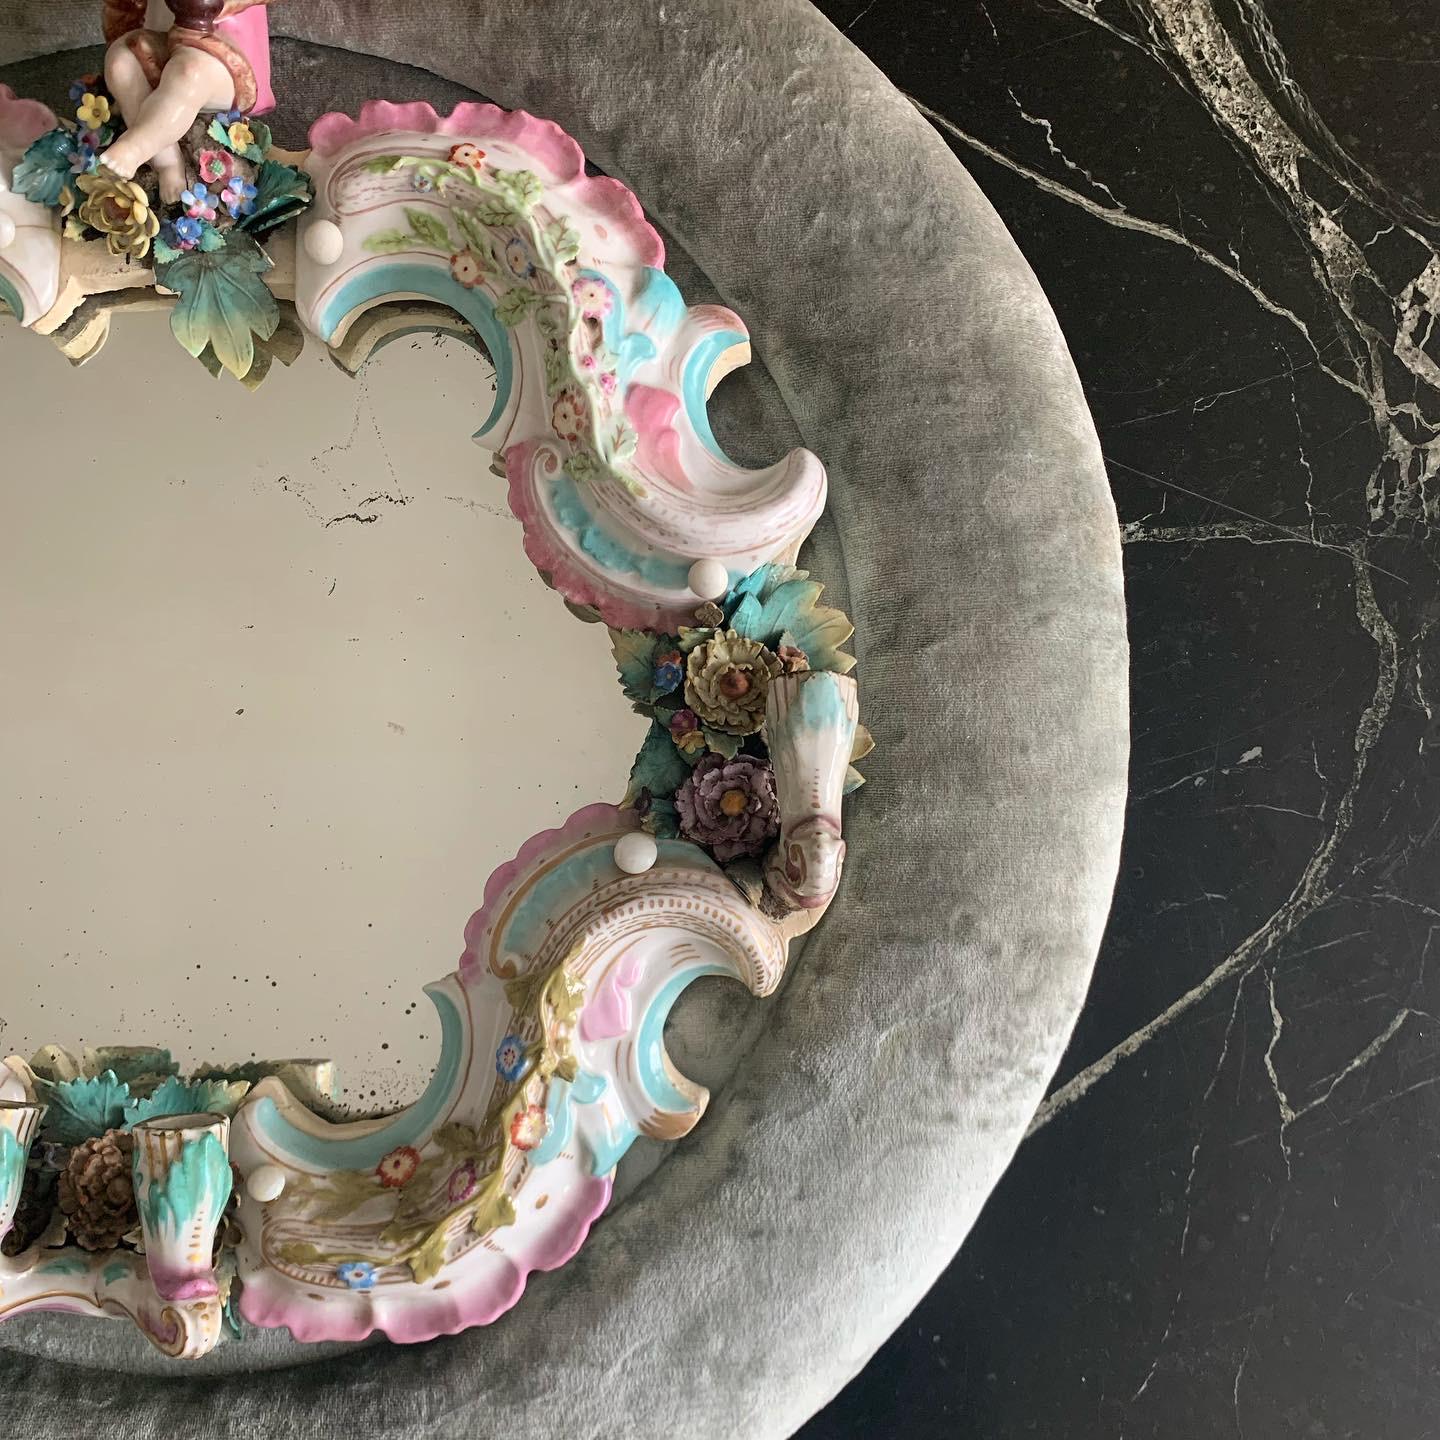 Baroque / Rococo girandole mirror / candelaria combo in Meissen enameled porcelain and gray crushed velvet. My wild guess is that the mirror portion is Viennese or German circa late 1800s and was later (perhaps about a century later, circa 1970s)